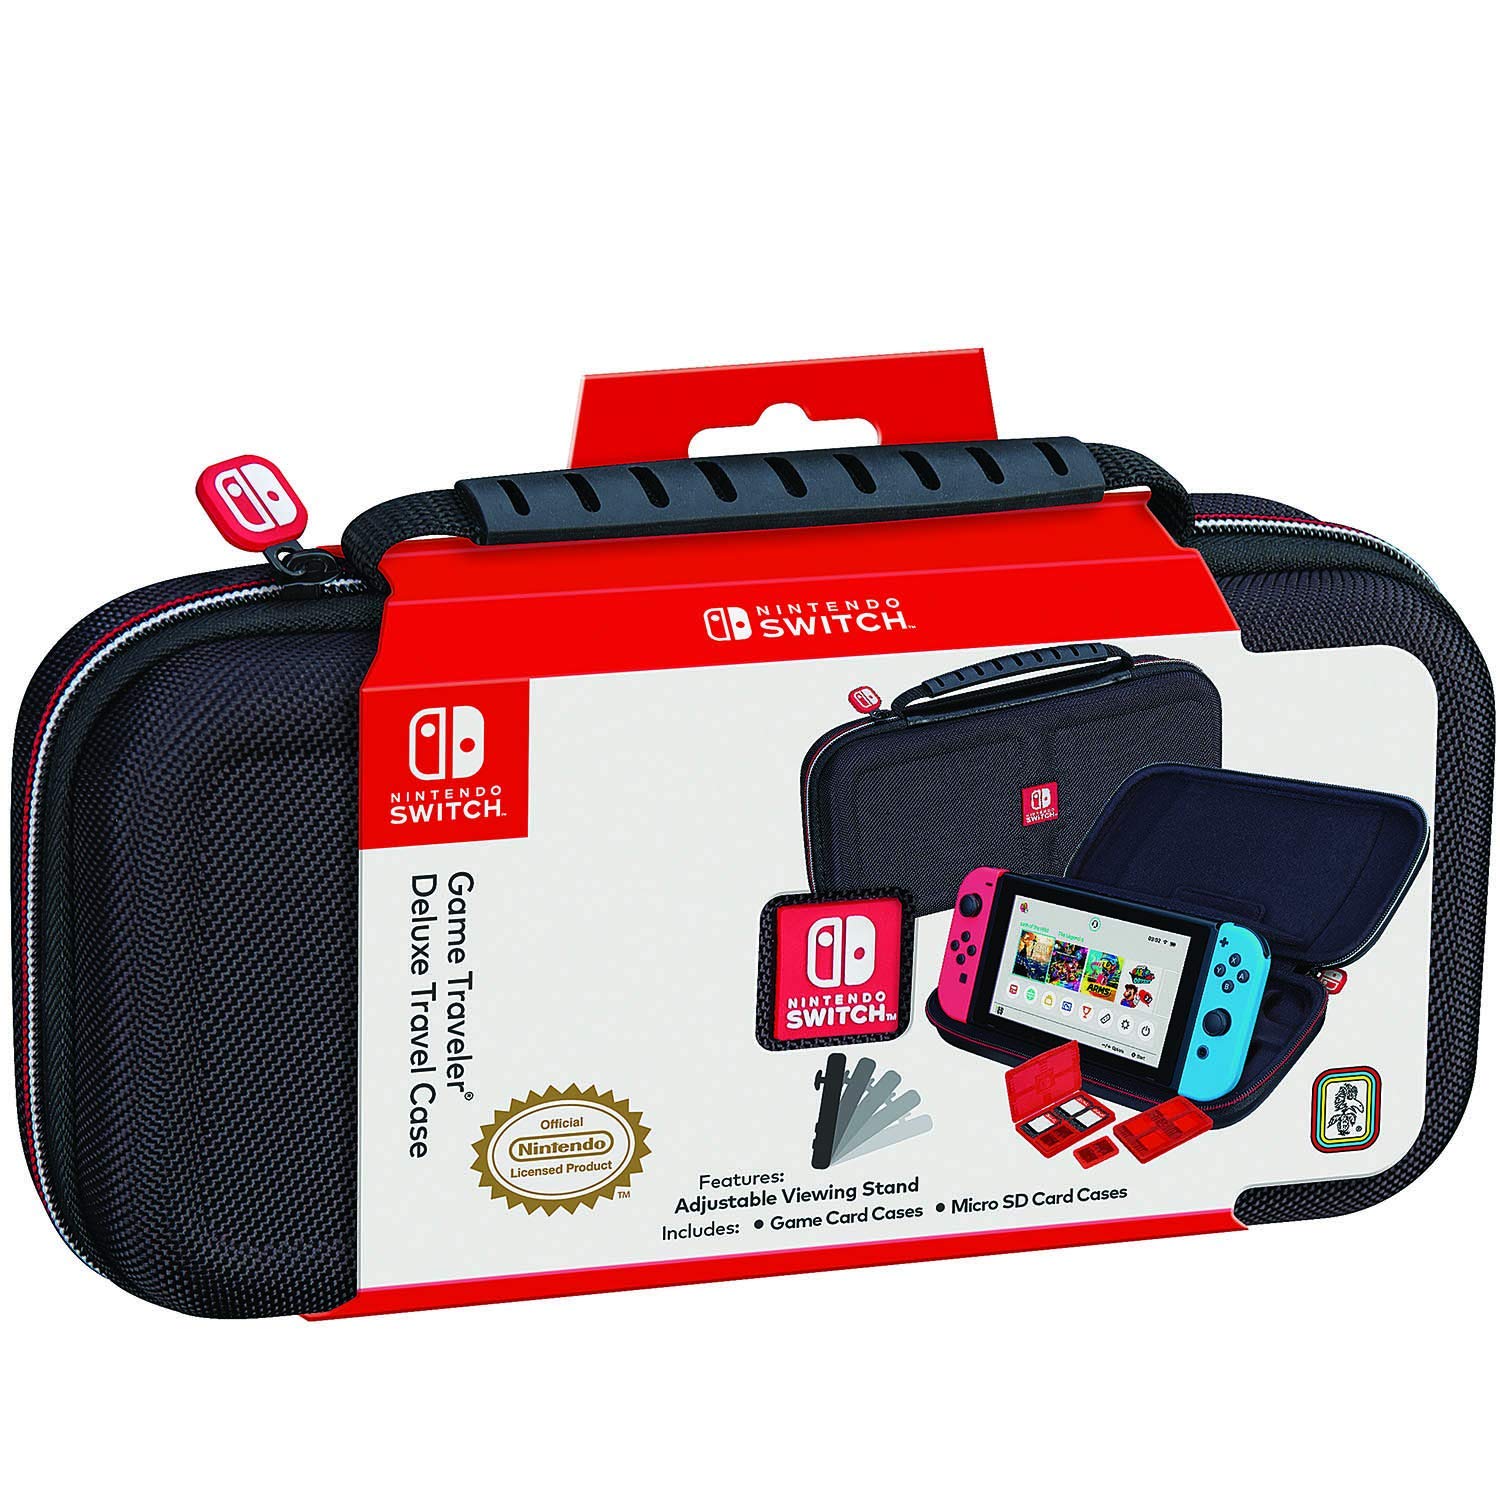 Officially Licensed Nintendo Switch Case